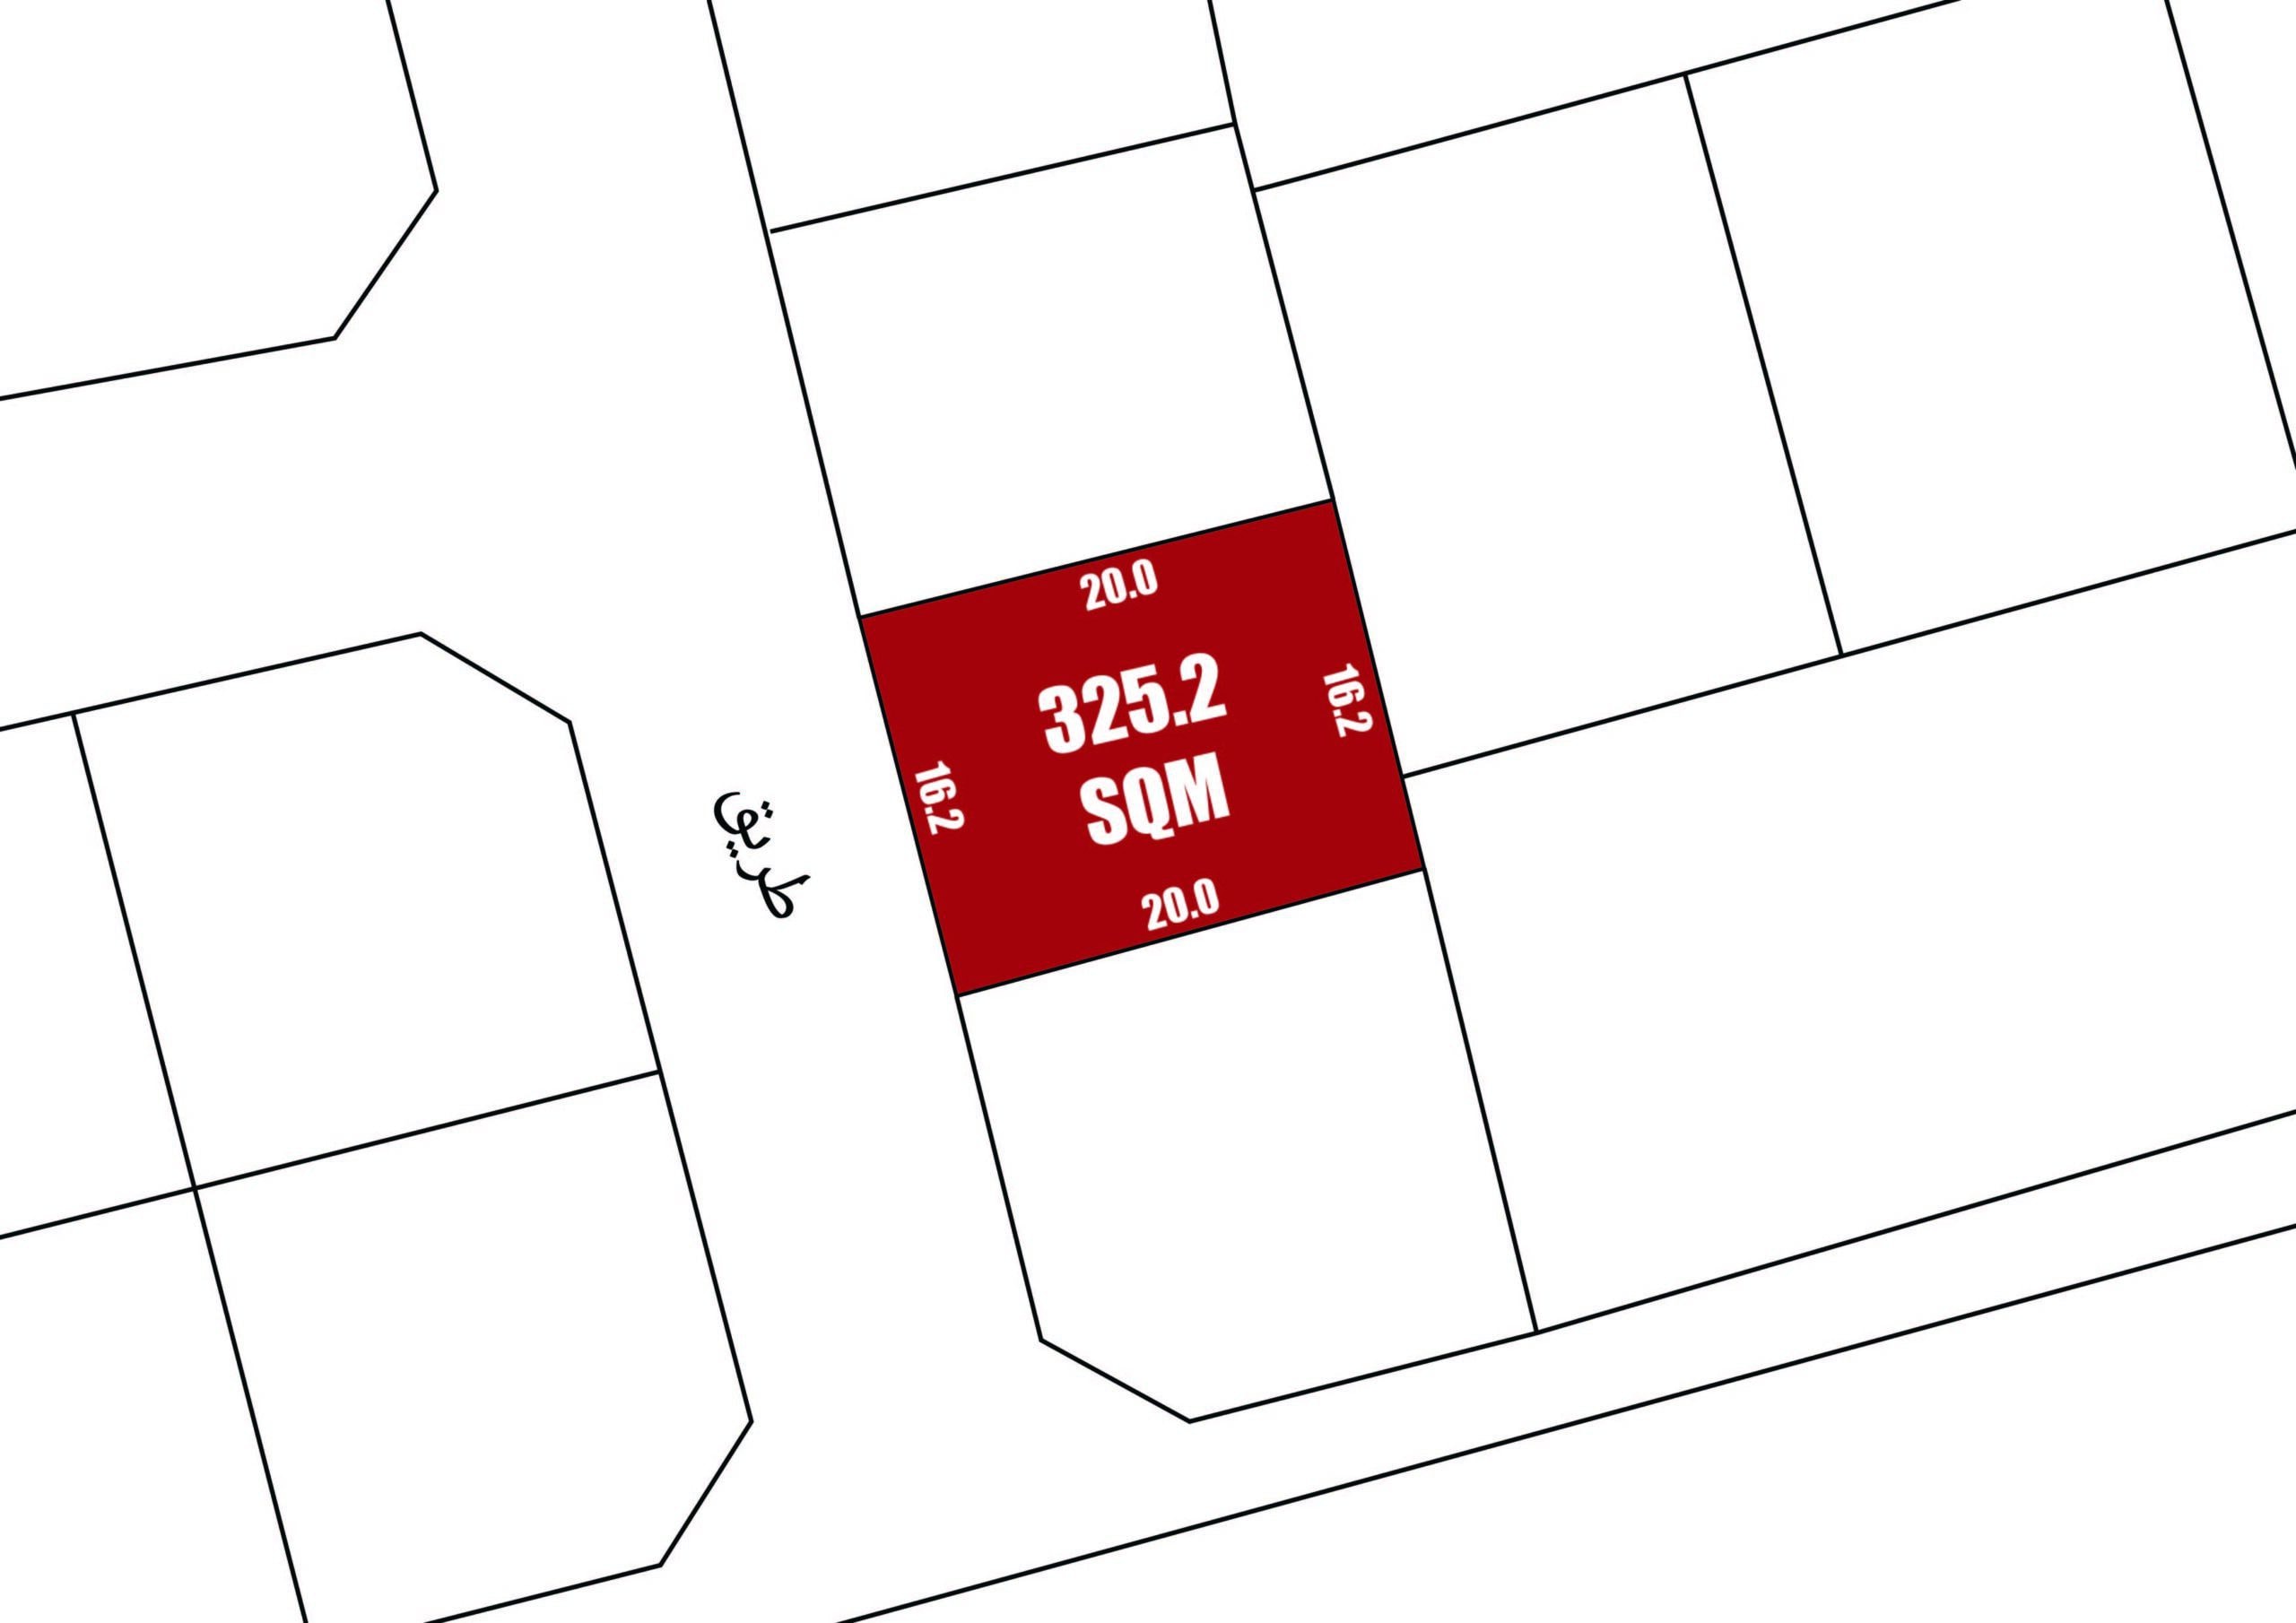 RA Land for Sale in Hamad‎ Town | 325.2 SQM